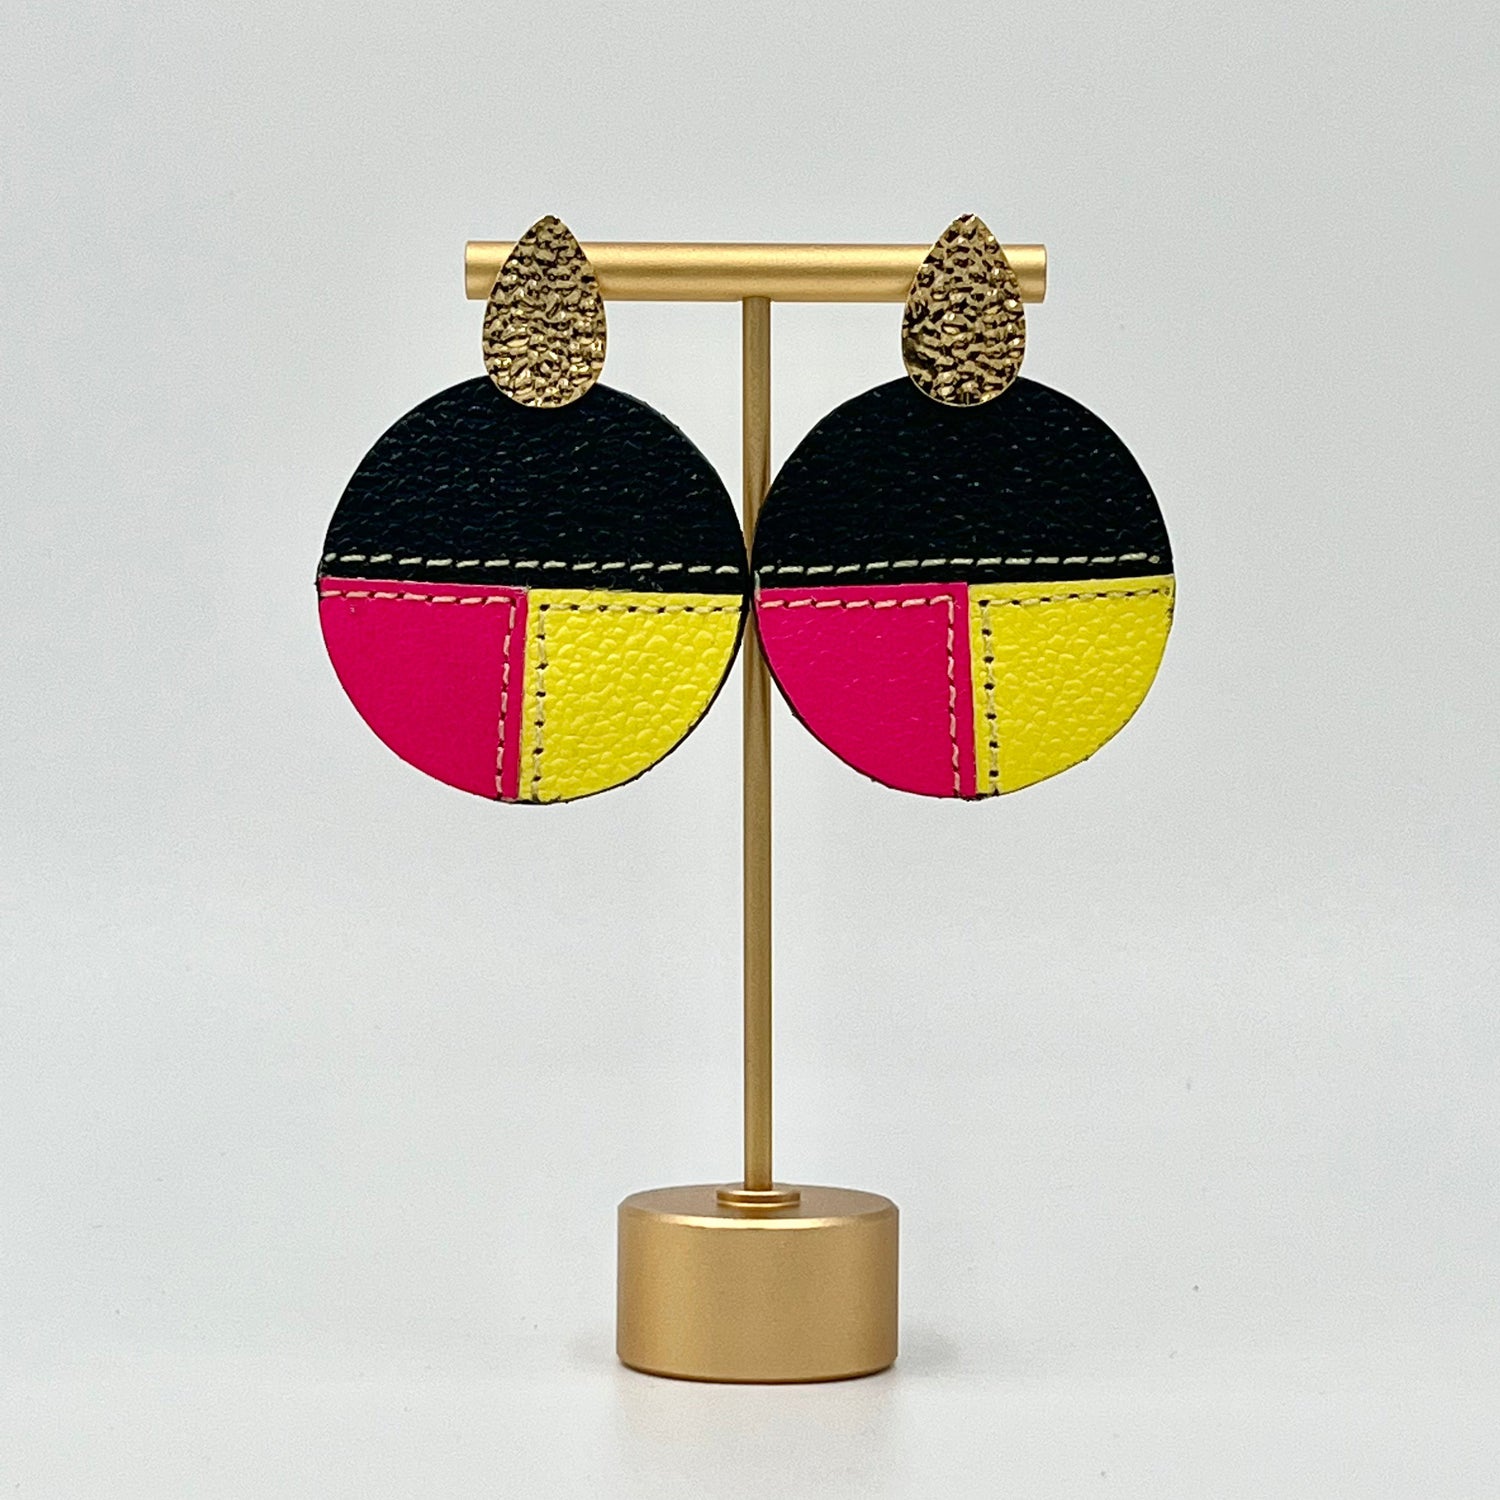 Black and yellow earrings, light weighted pink earrings, black and bight colors earrings. 